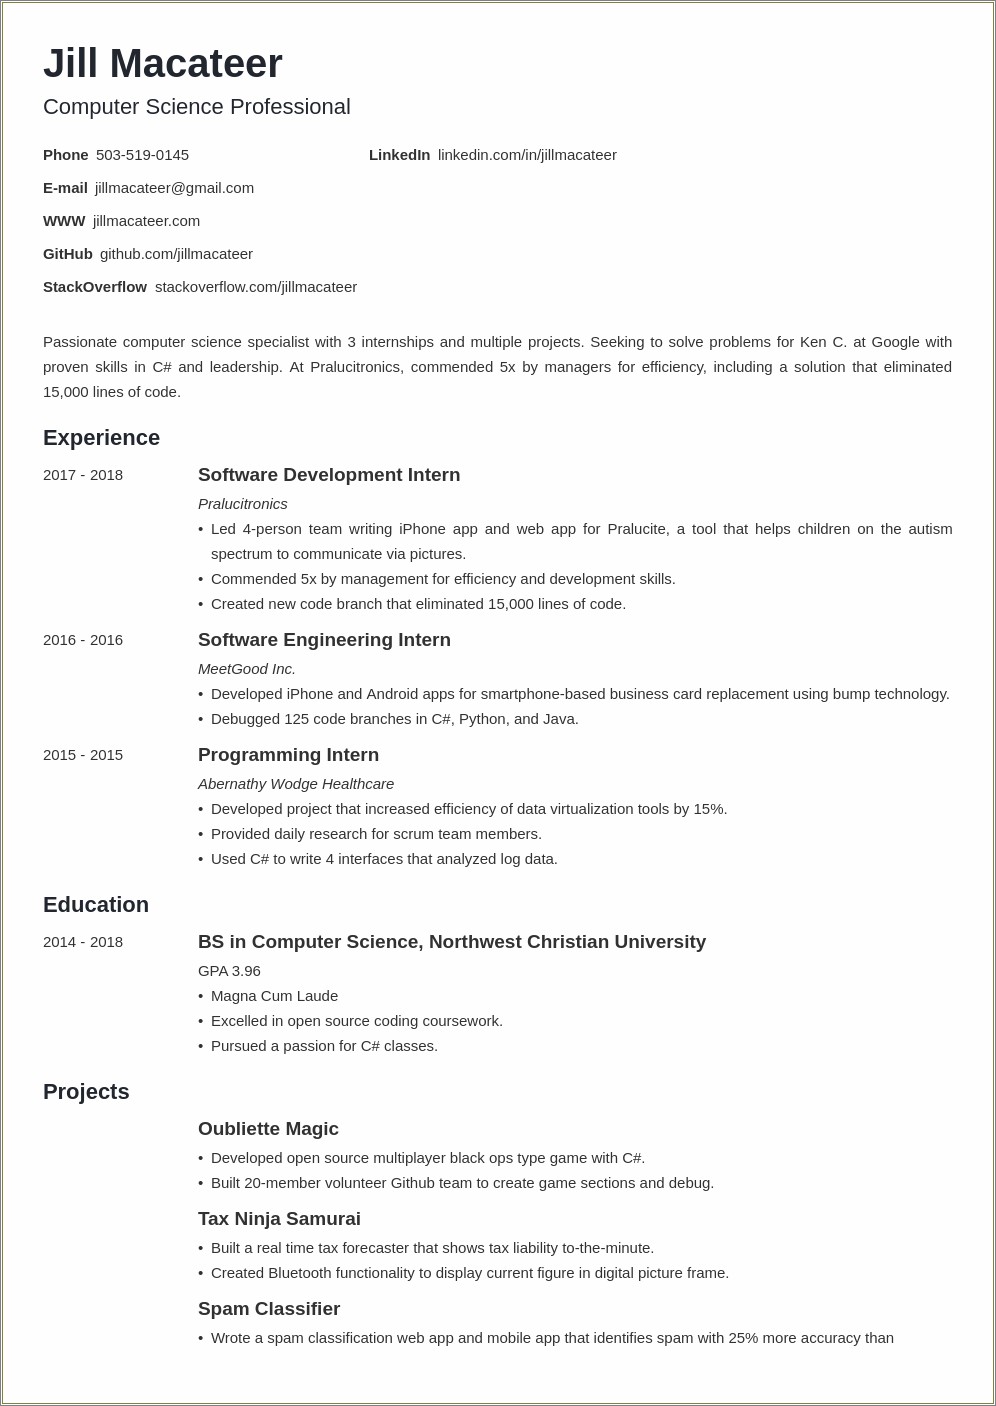 Sample Resume For Assistant Professor In Computer Science